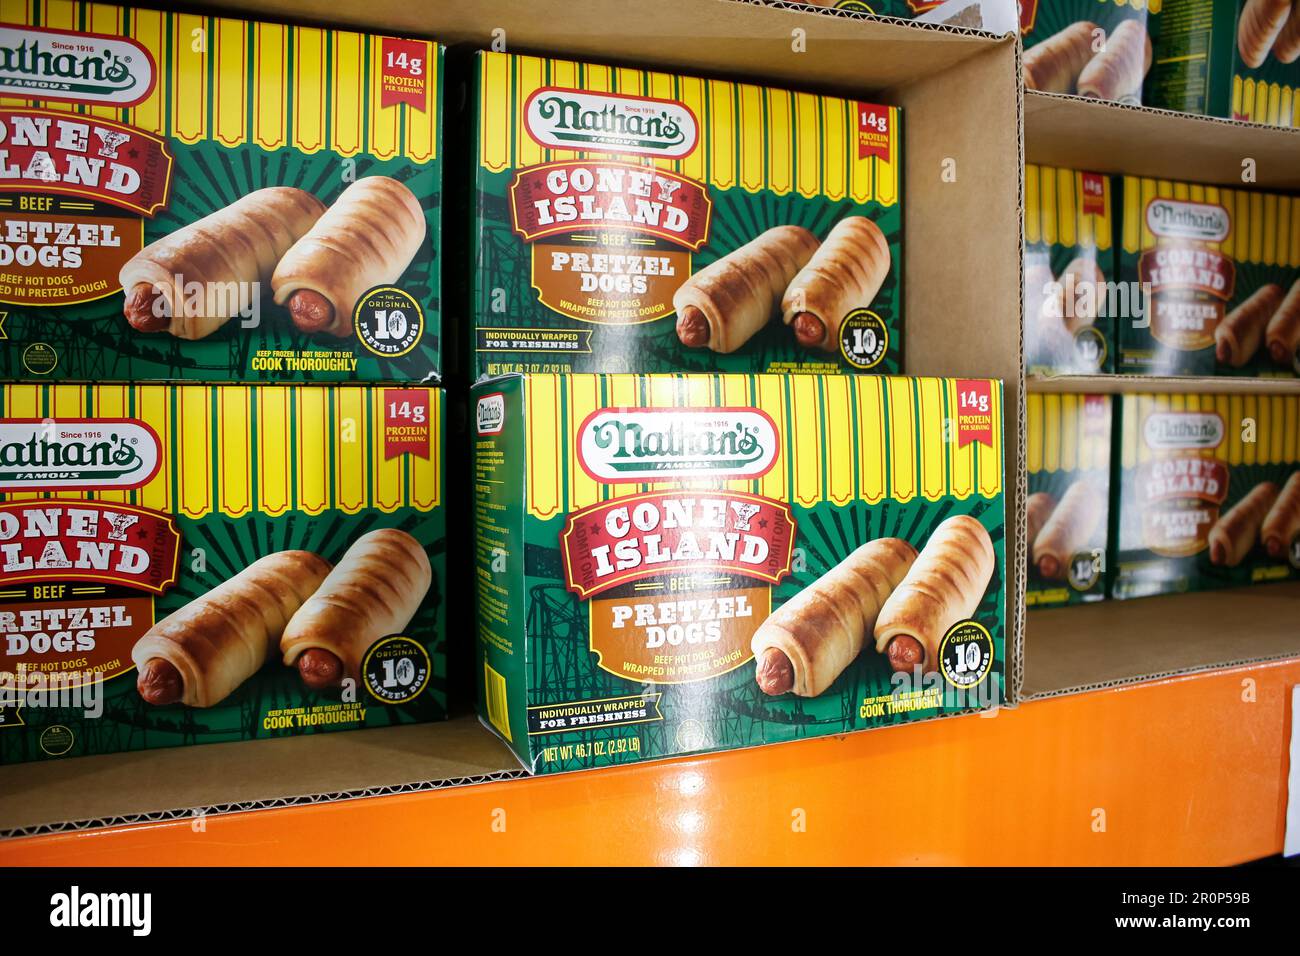 Los Angeles, California, United States - 10-25-2021: A view of several packages of Nathan's Coney Island pretzel dogs, on display at a local big box g Stock Photo